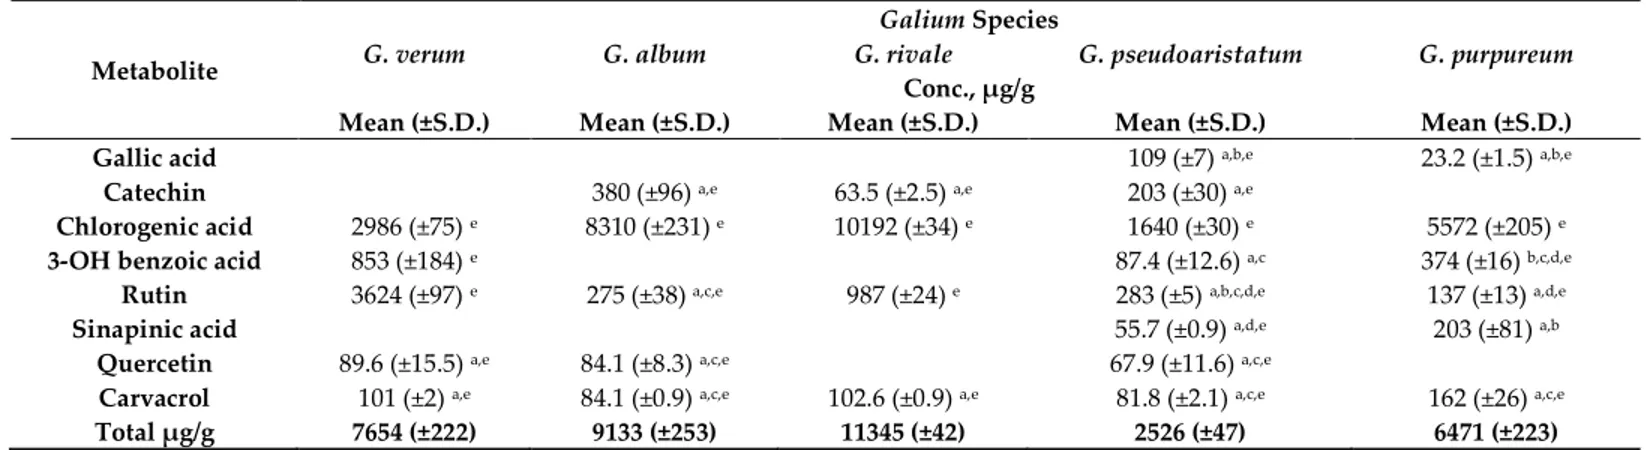 Table 2. Phenolic compounds quantified in Galium spp. using DLLME in 15% NADES (values expressed are means ± S.D